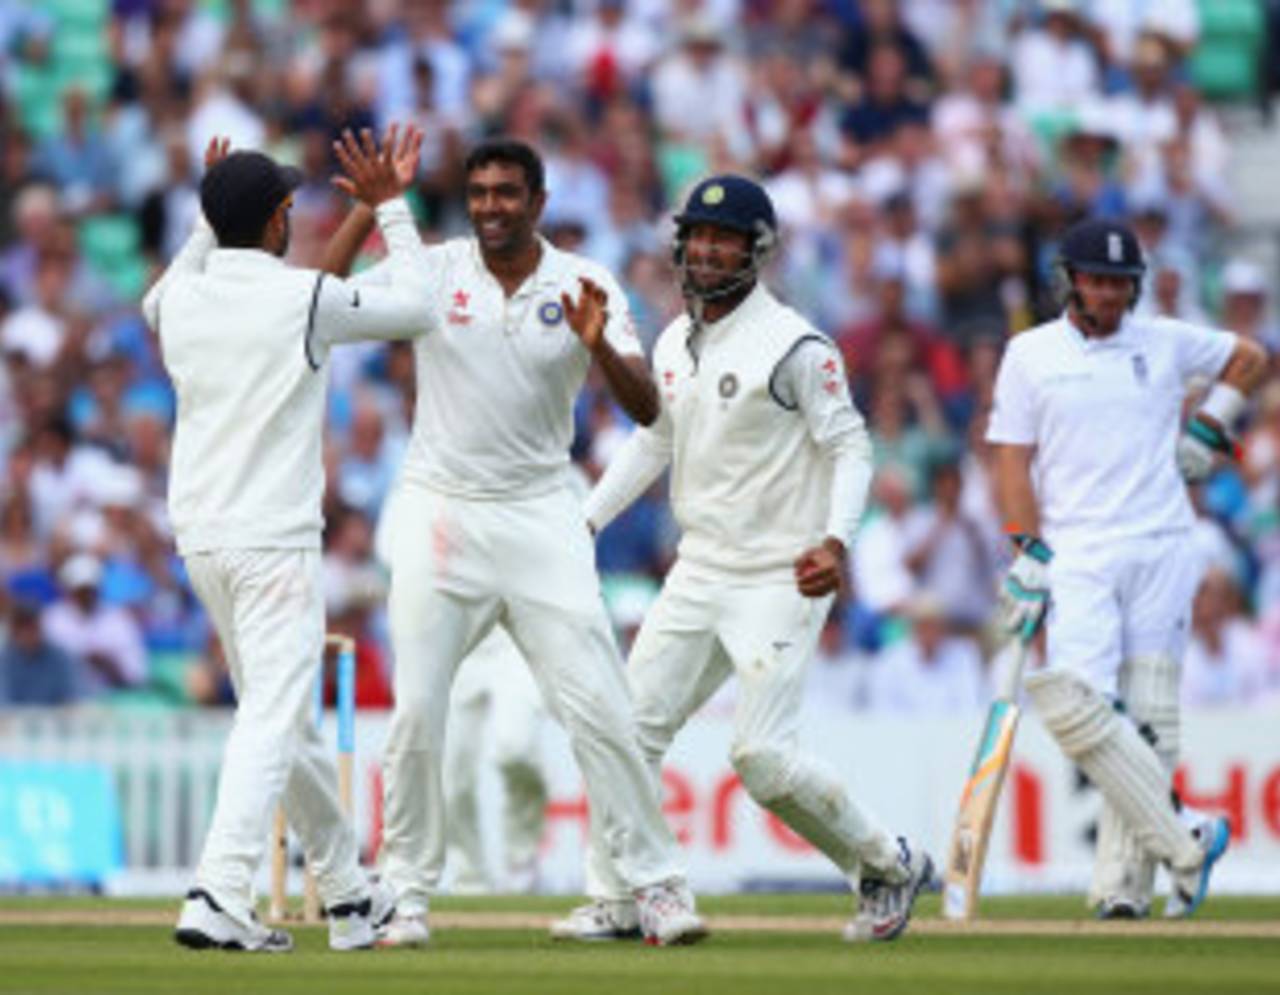 R Ashwin ended a two-year drought for a wicket overseas&nbsp;&nbsp;&bull;&nbsp;&nbsp;Getty Images